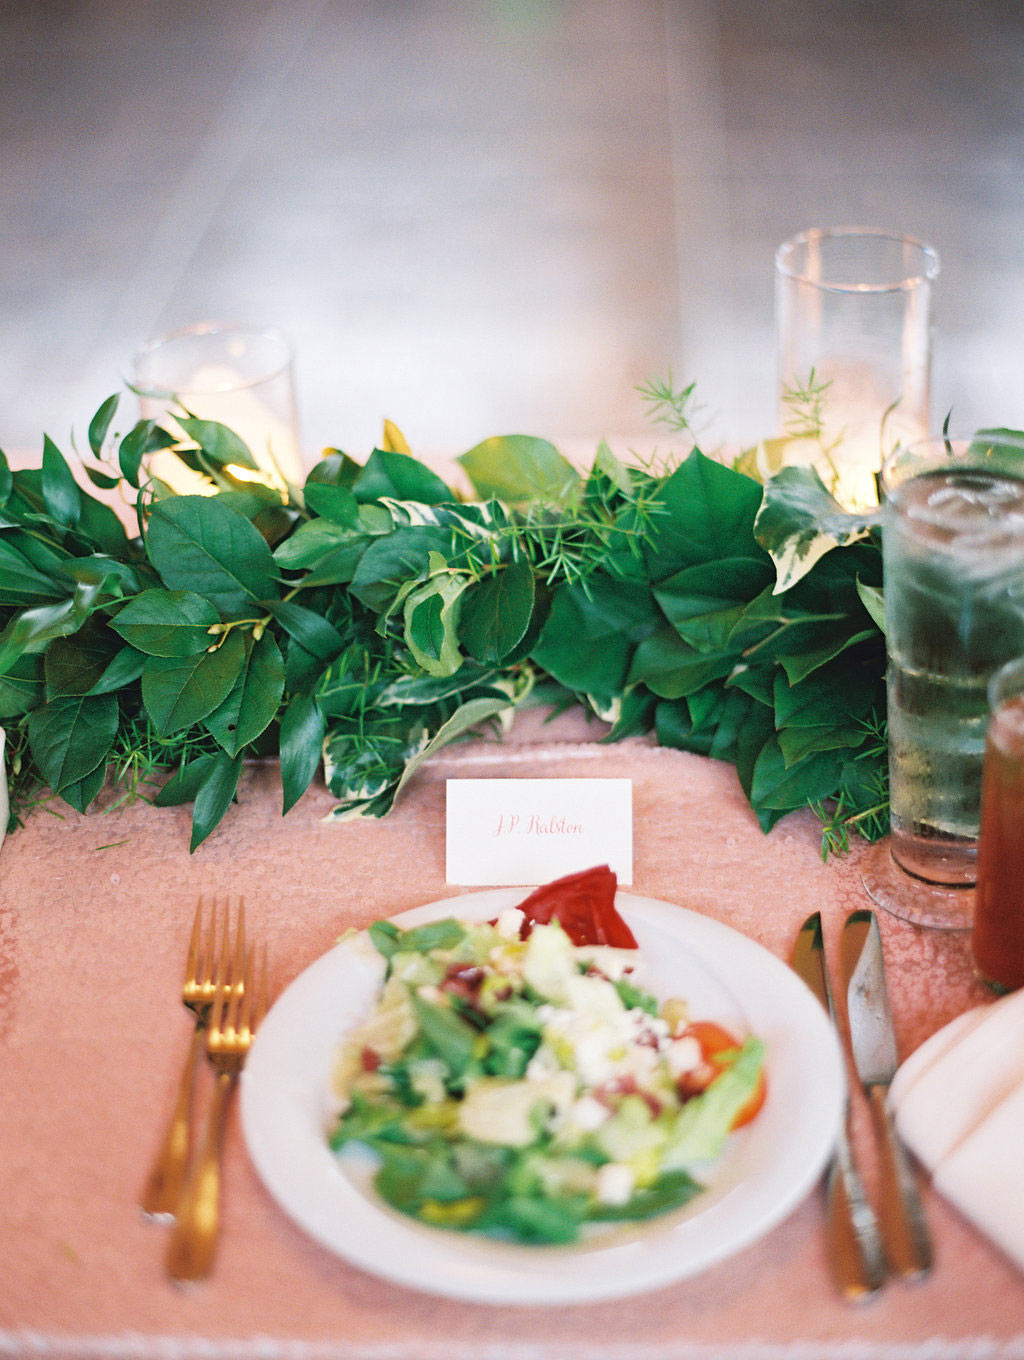 Green garland table runner and wedding place setting with salad